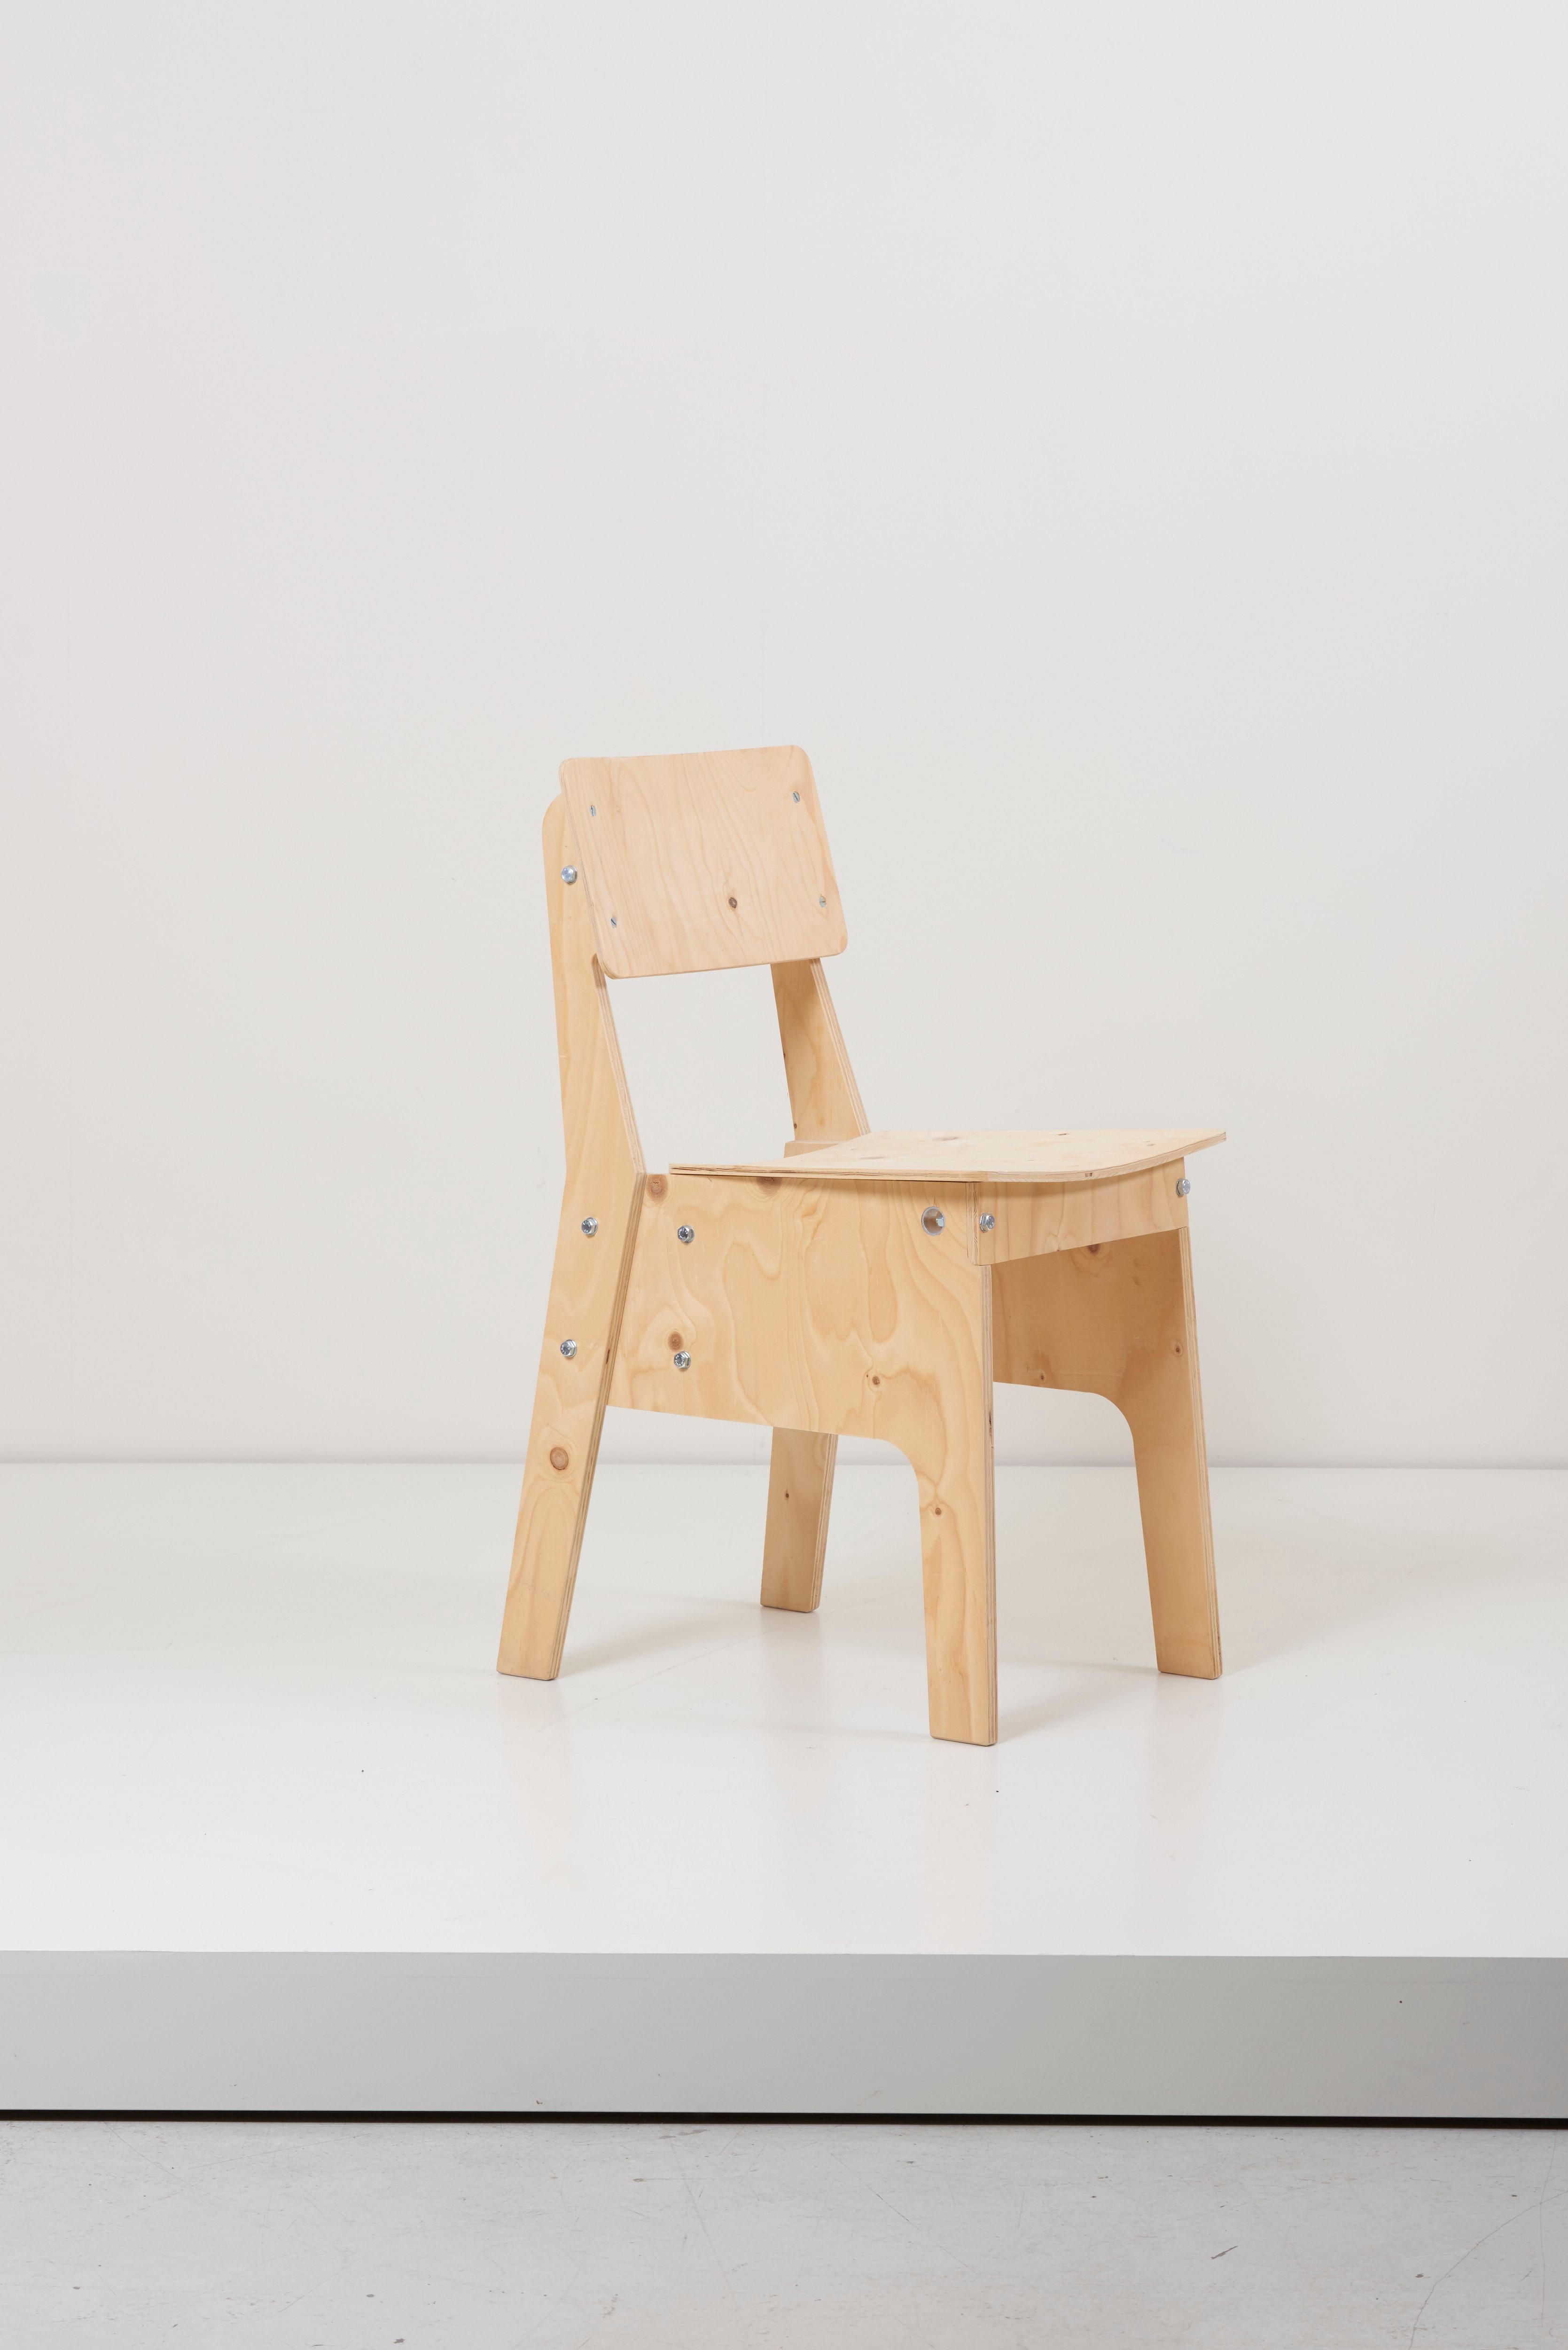 1 of 3 Crisis Chairs by Piet Hein Eek in Plywood 1